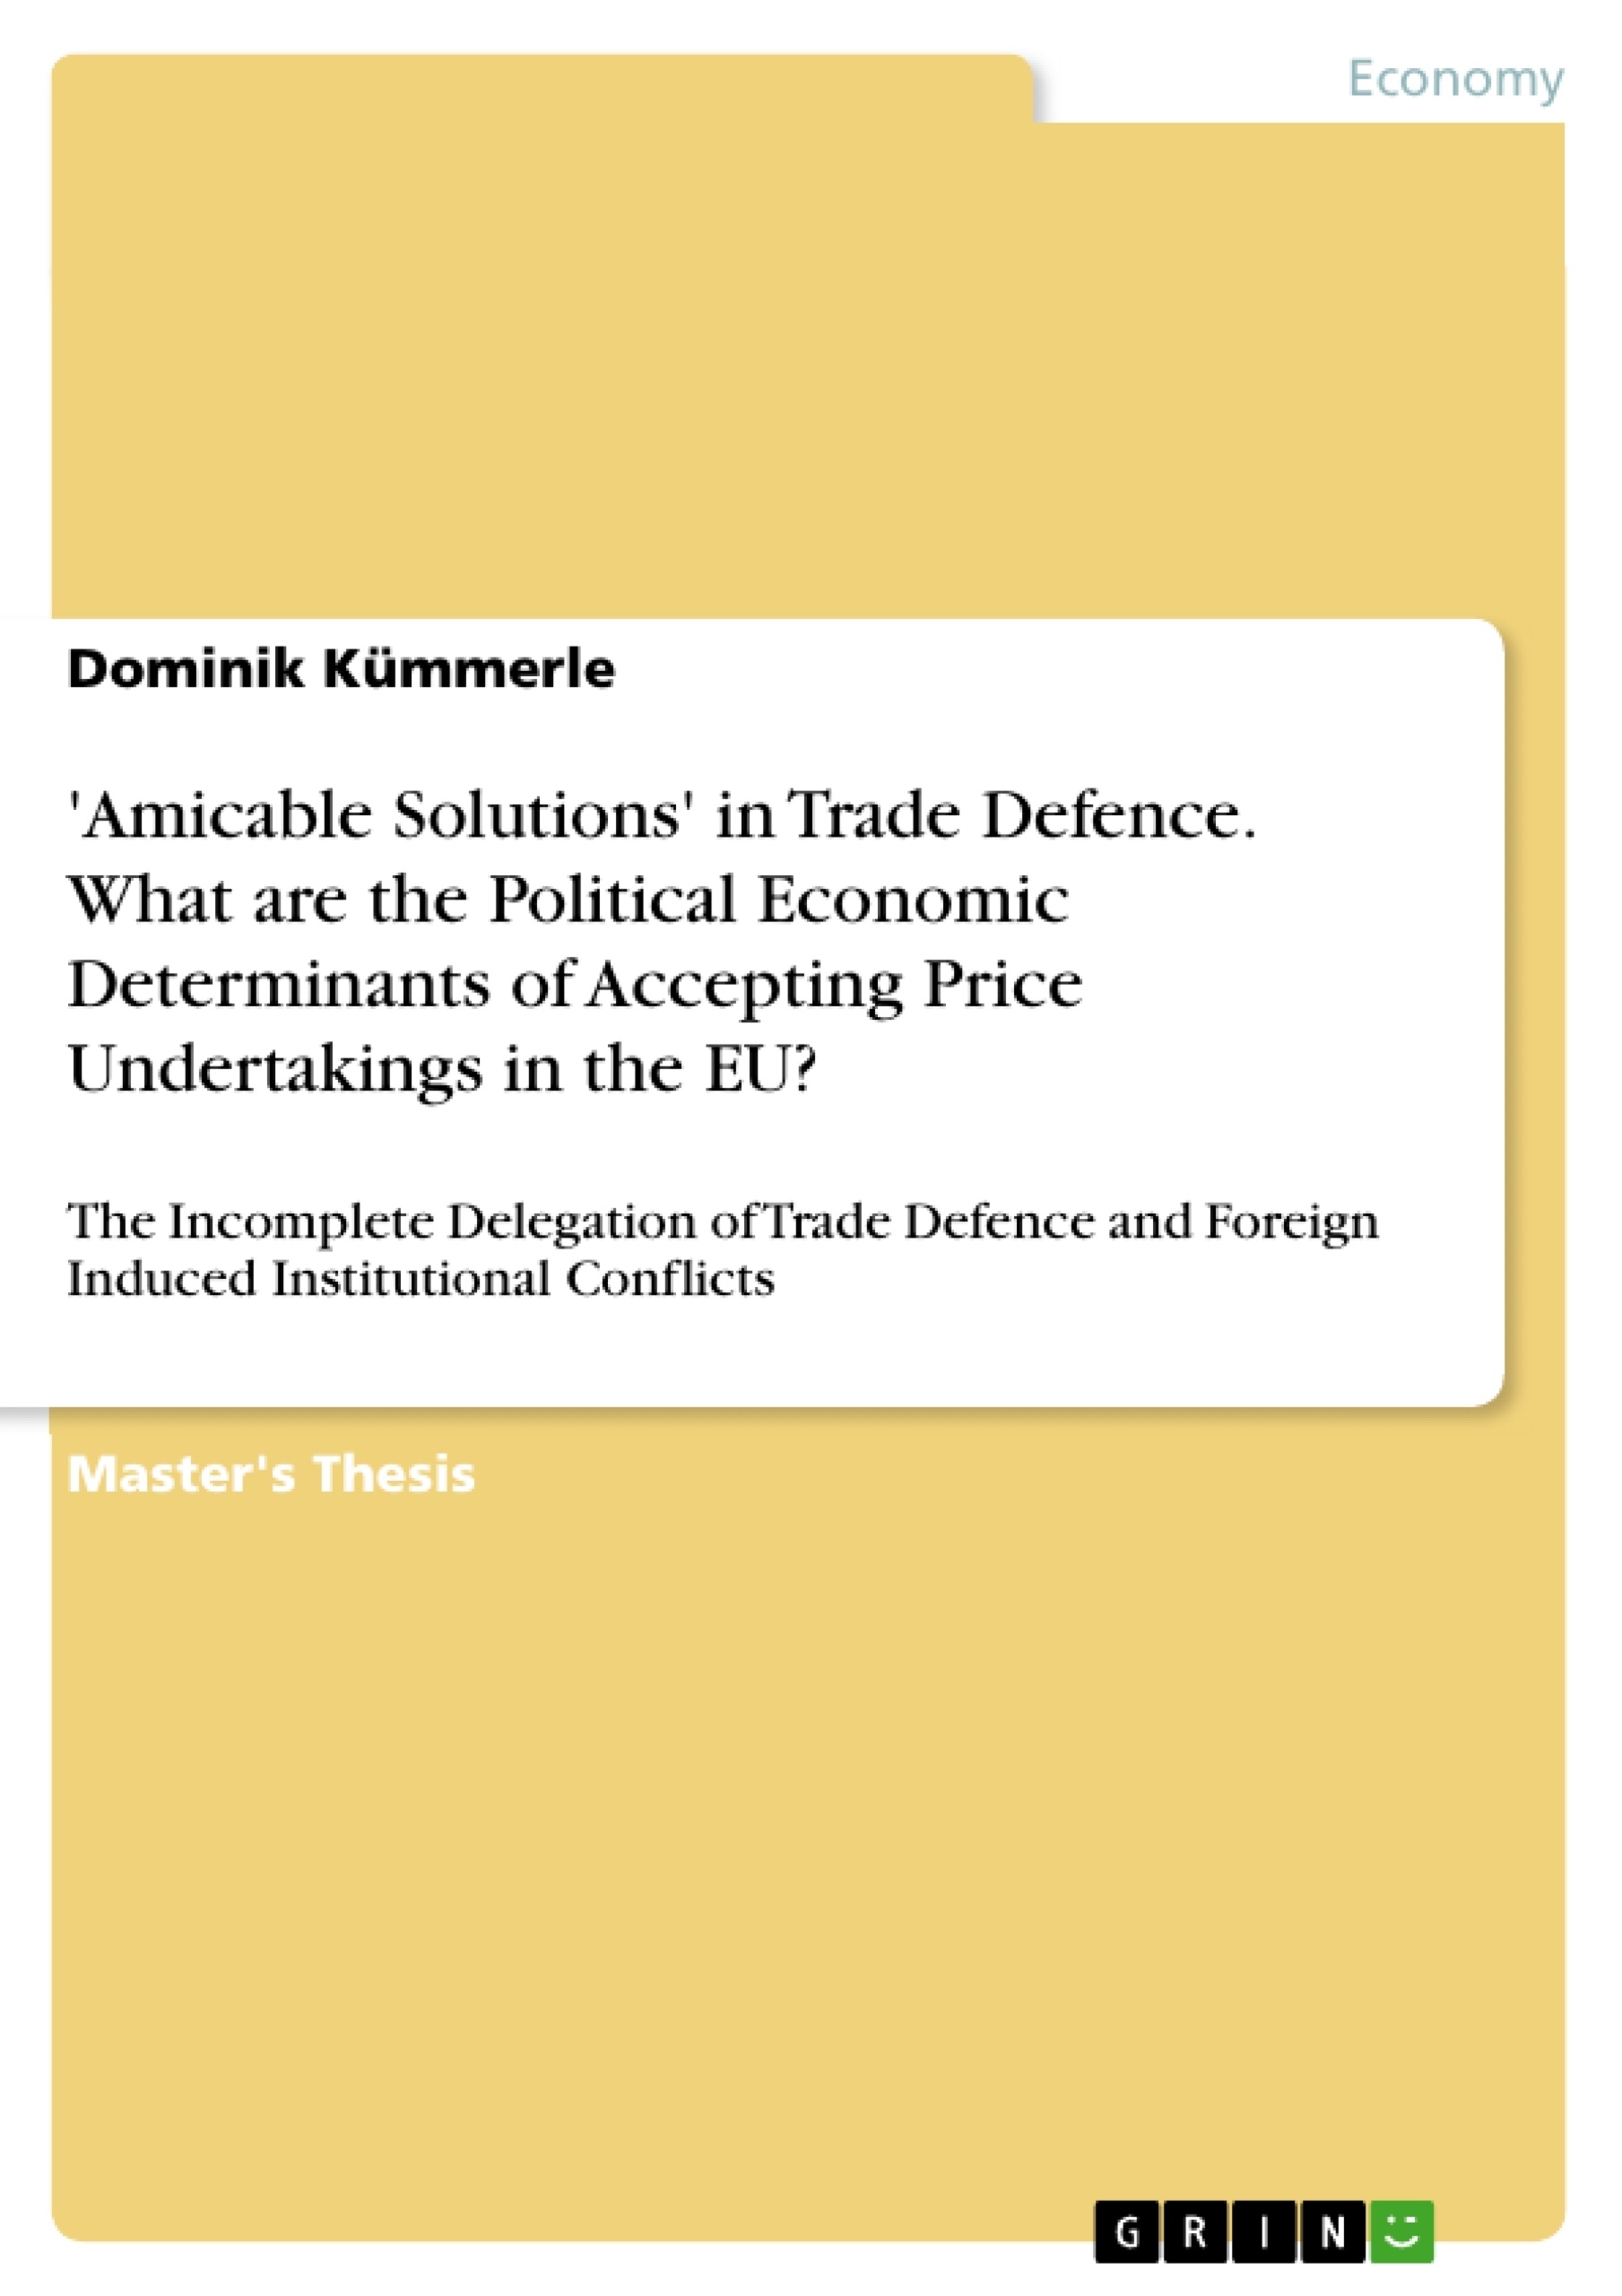 Titel: 'Amicable Solutions' in Trade Defence. What are the Political Economic Determinants of Accepting Price Undertakings in the EU?